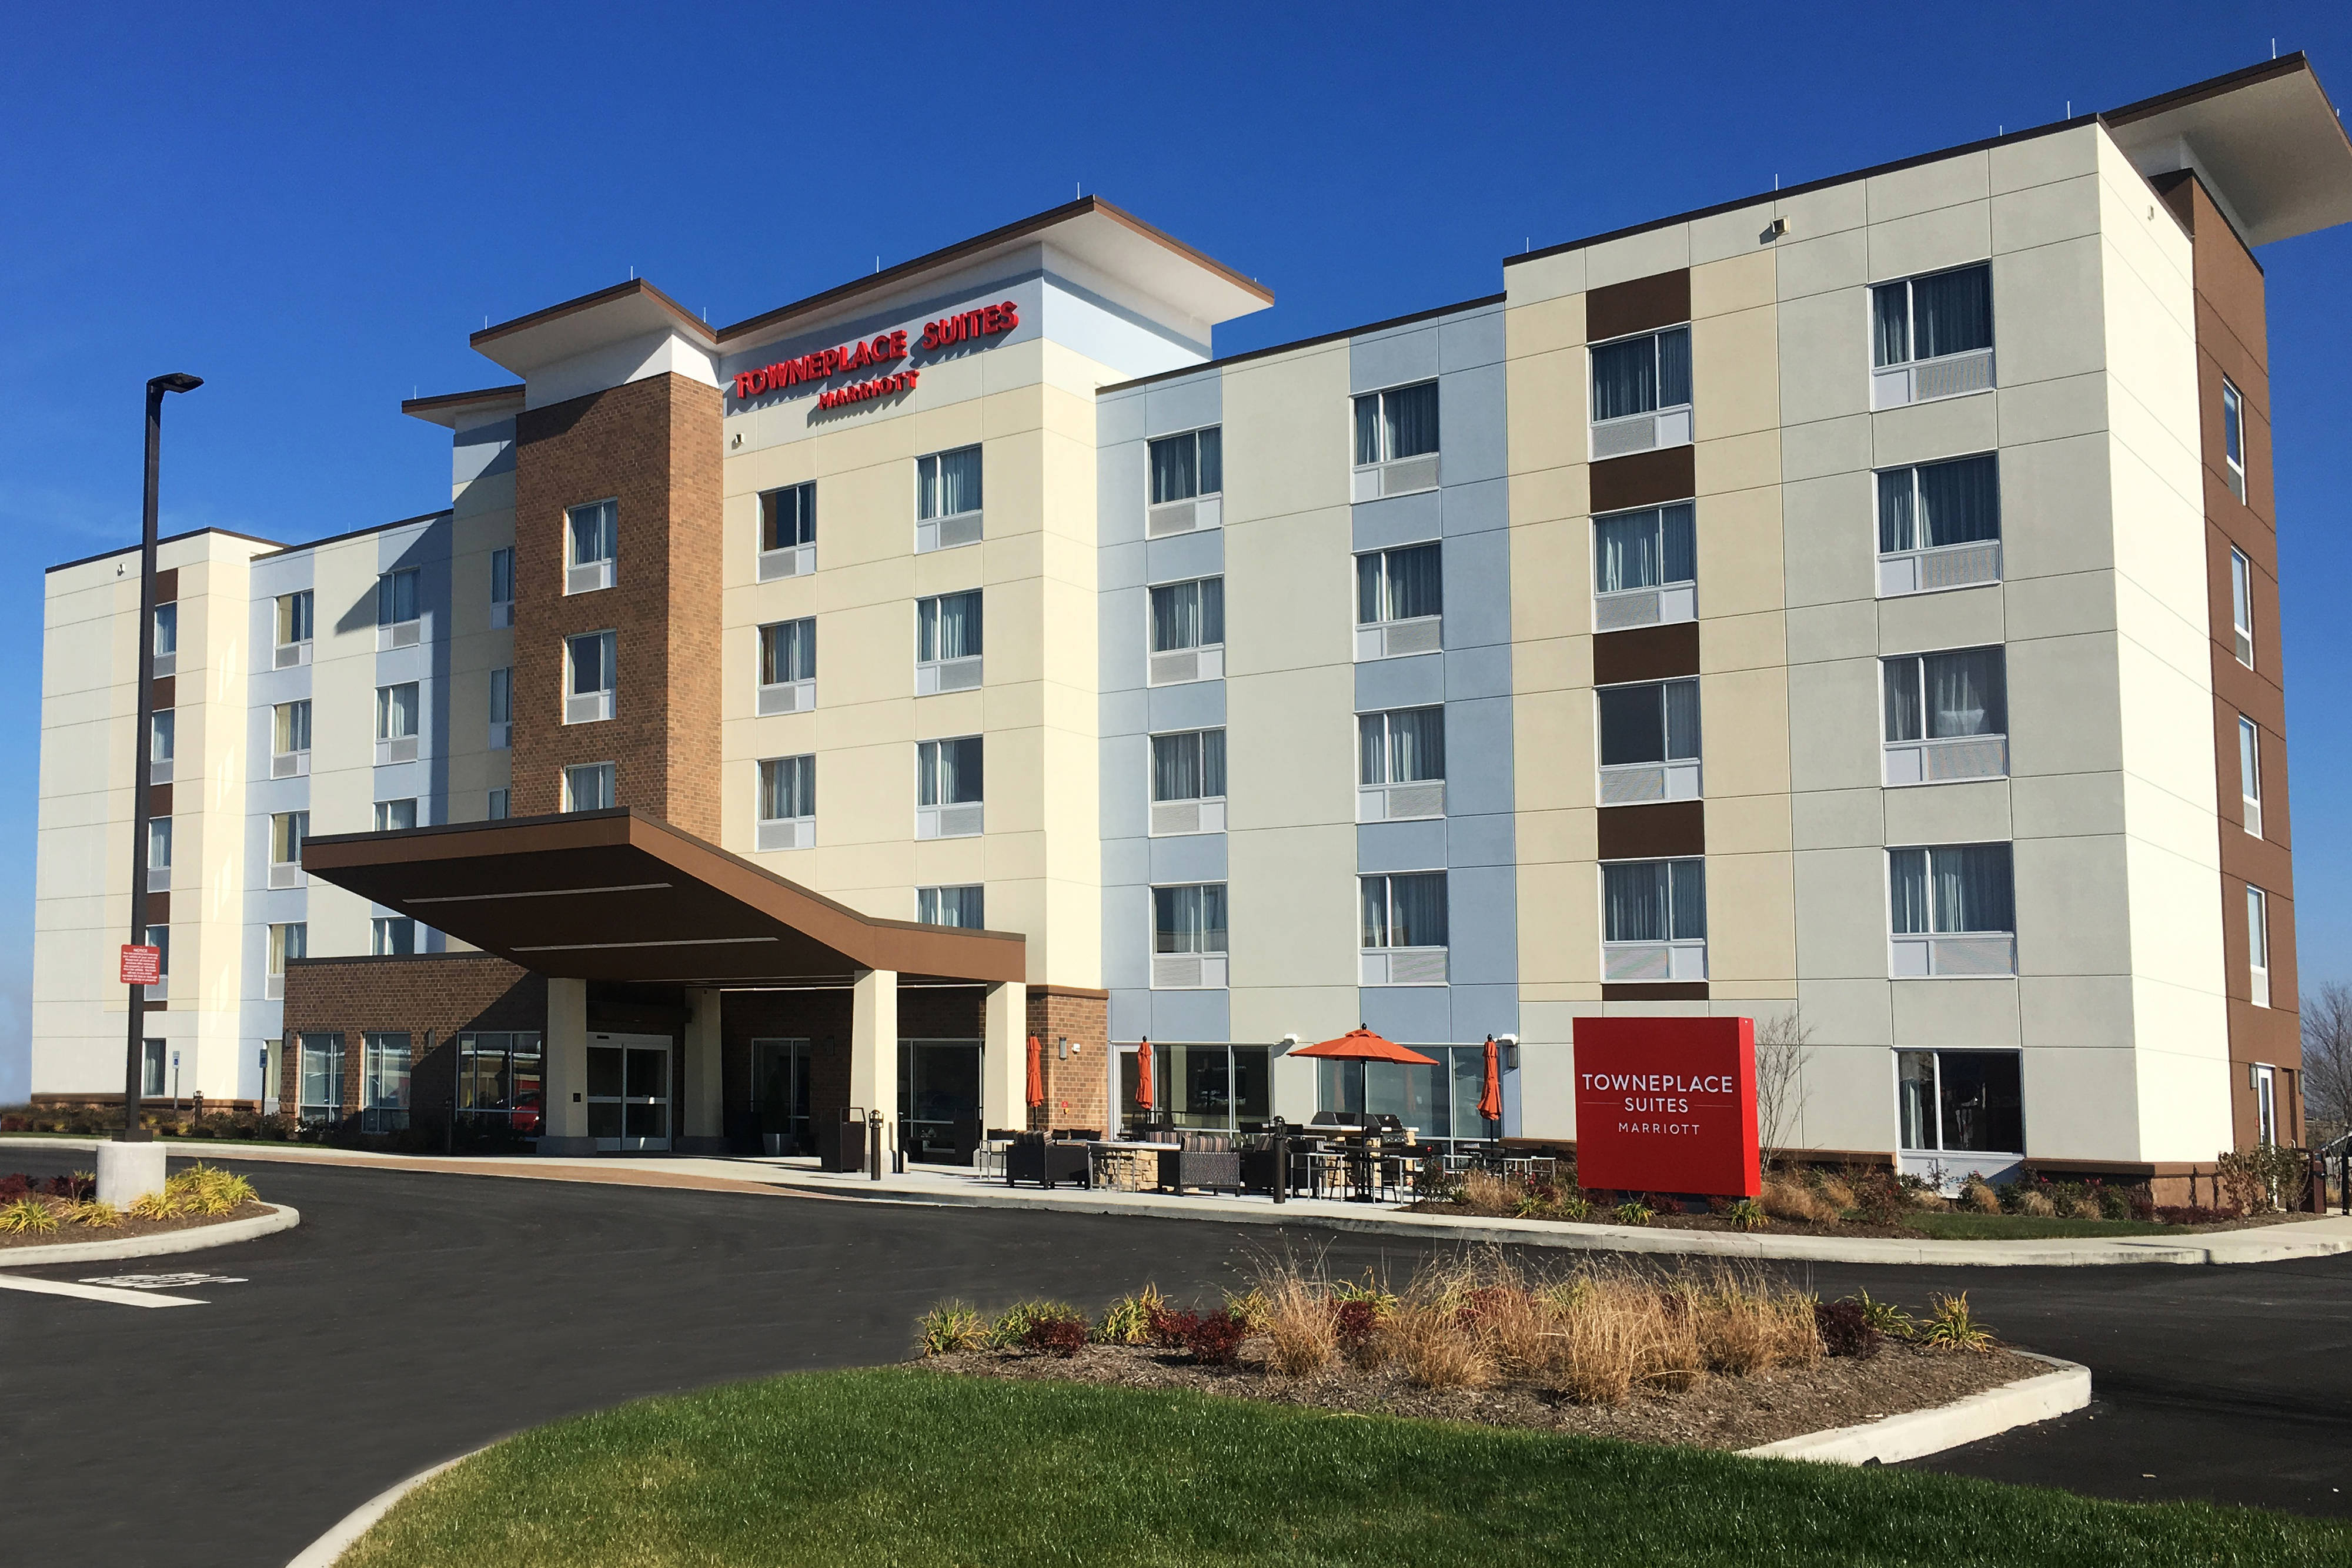 Photo of TownePlace Suites Grove City Mercer/Outlets, Mercer, PA